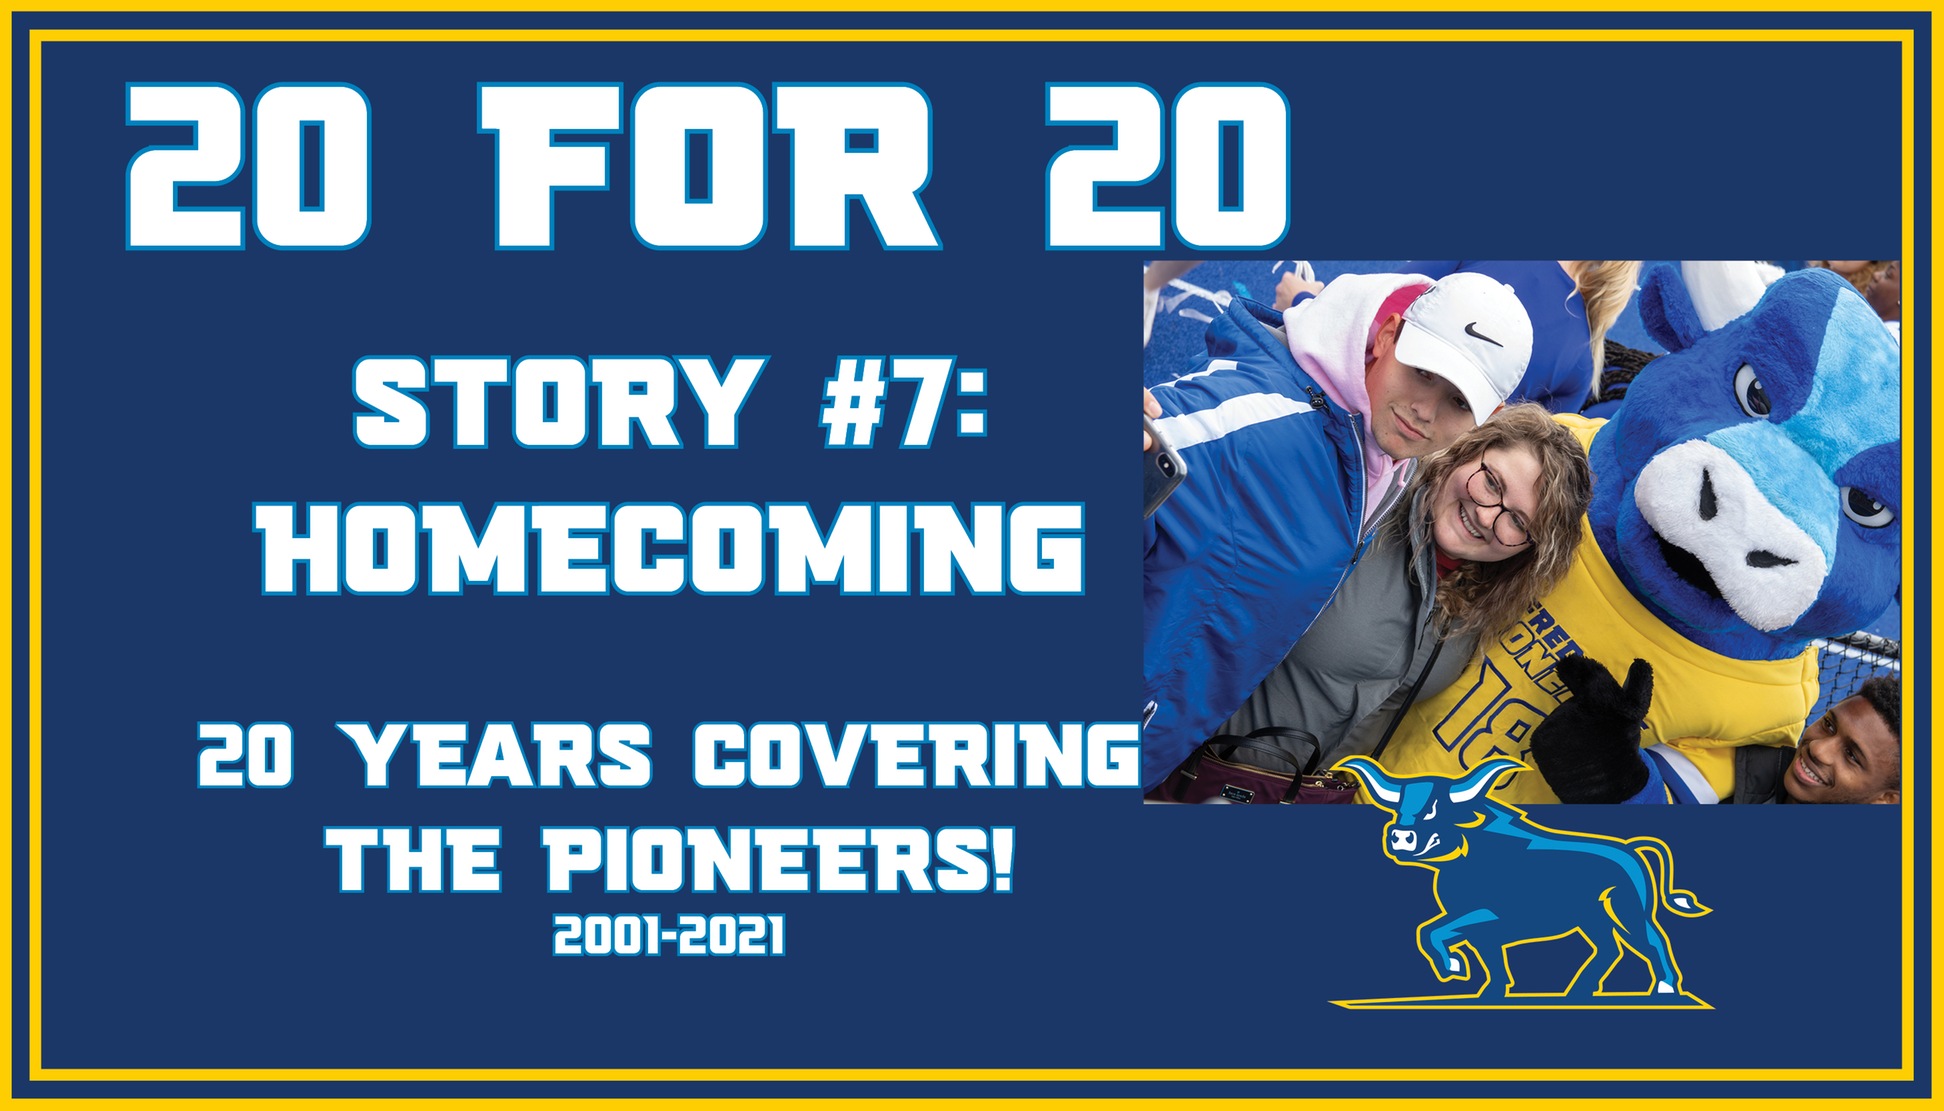 20 for 20 - Story #7 - Homecoming

Picture is Big Blue with some fans at Homecoming 2019